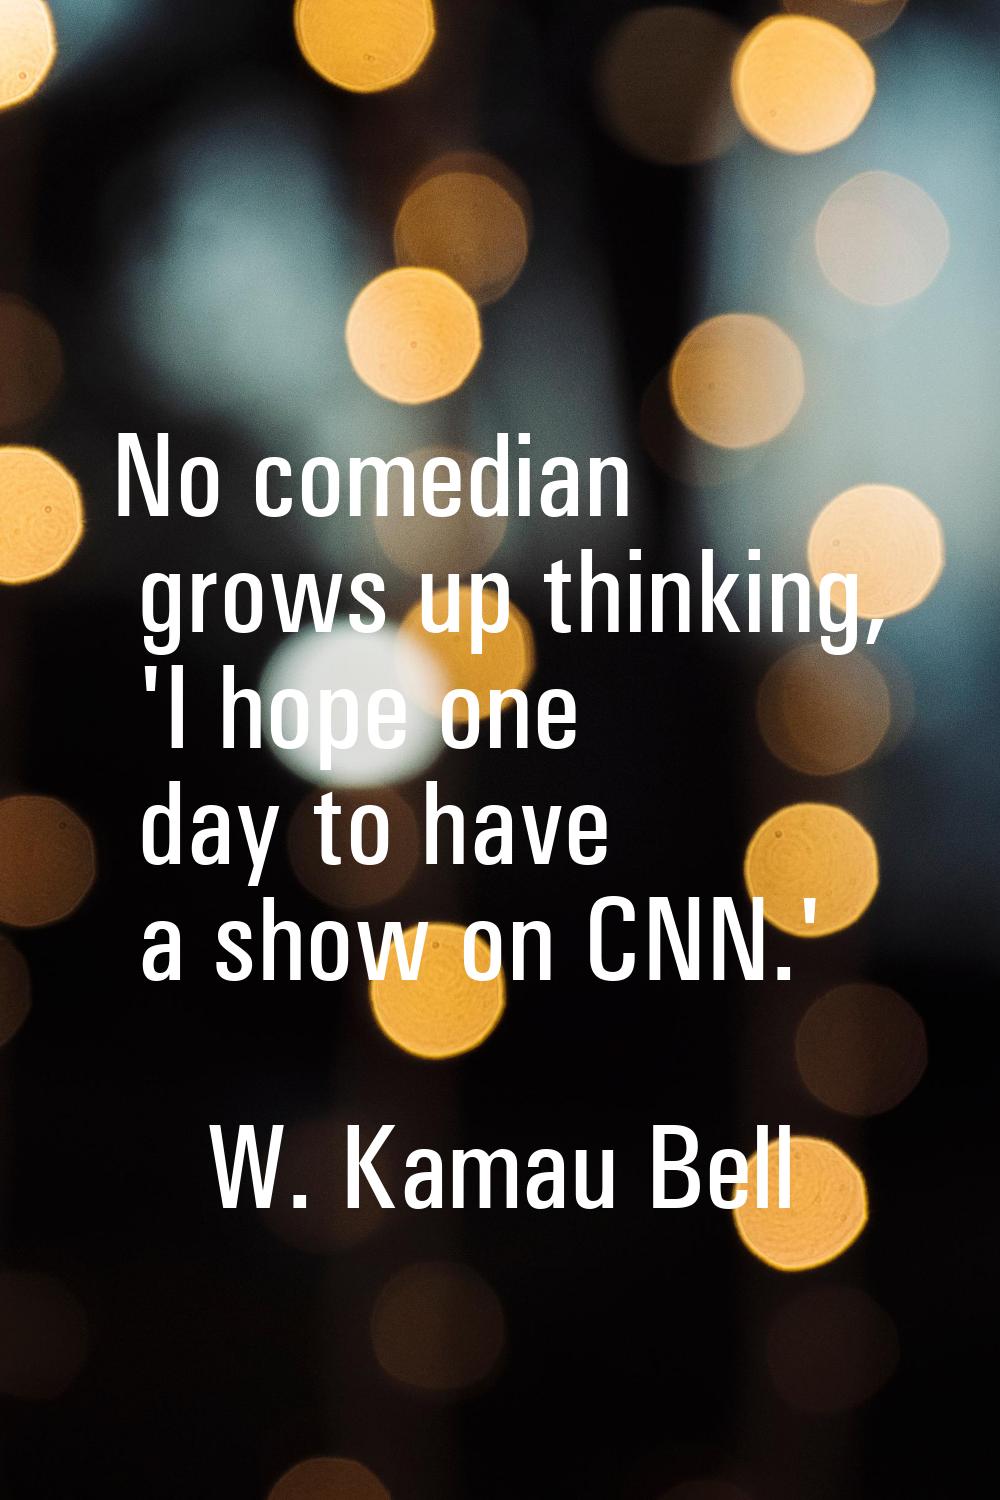 No comedian grows up thinking, 'I hope one day to have a show on CNN.'